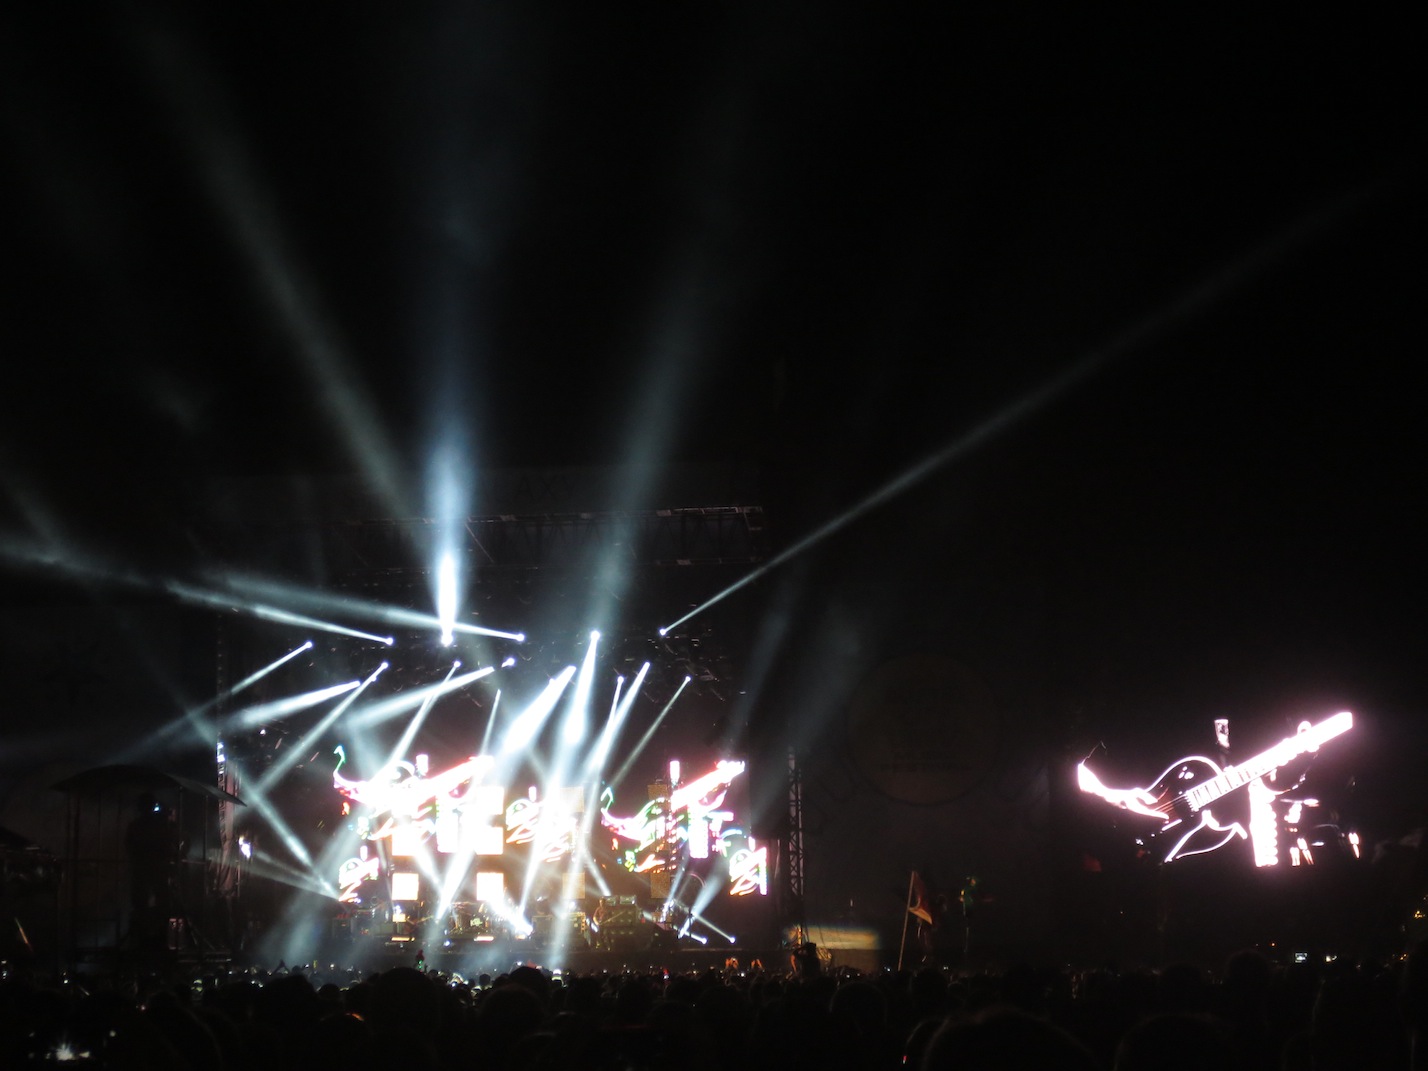 Another Kings of Leon shot.